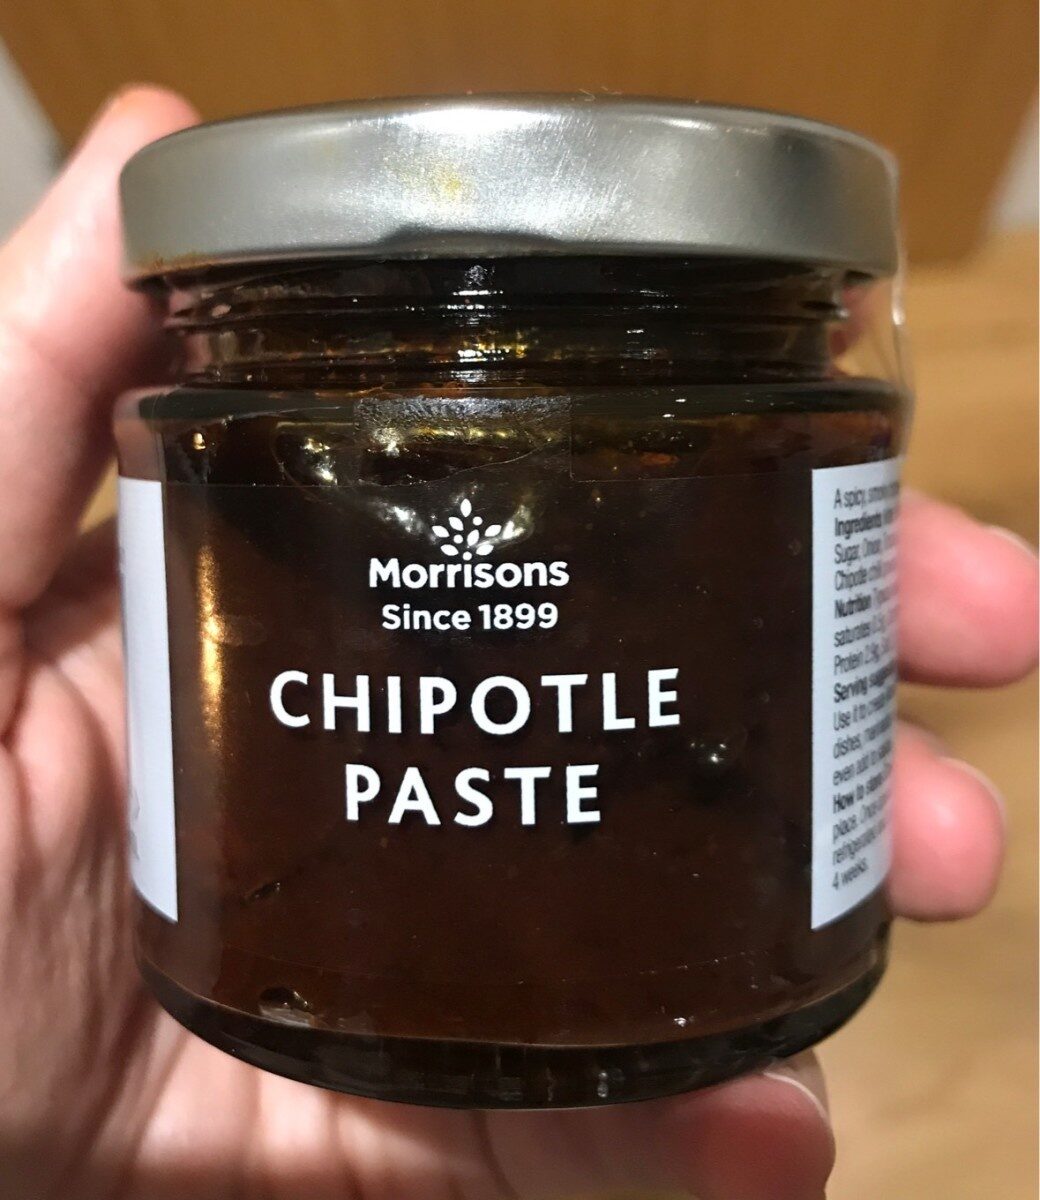 Chipotle Paste - Product